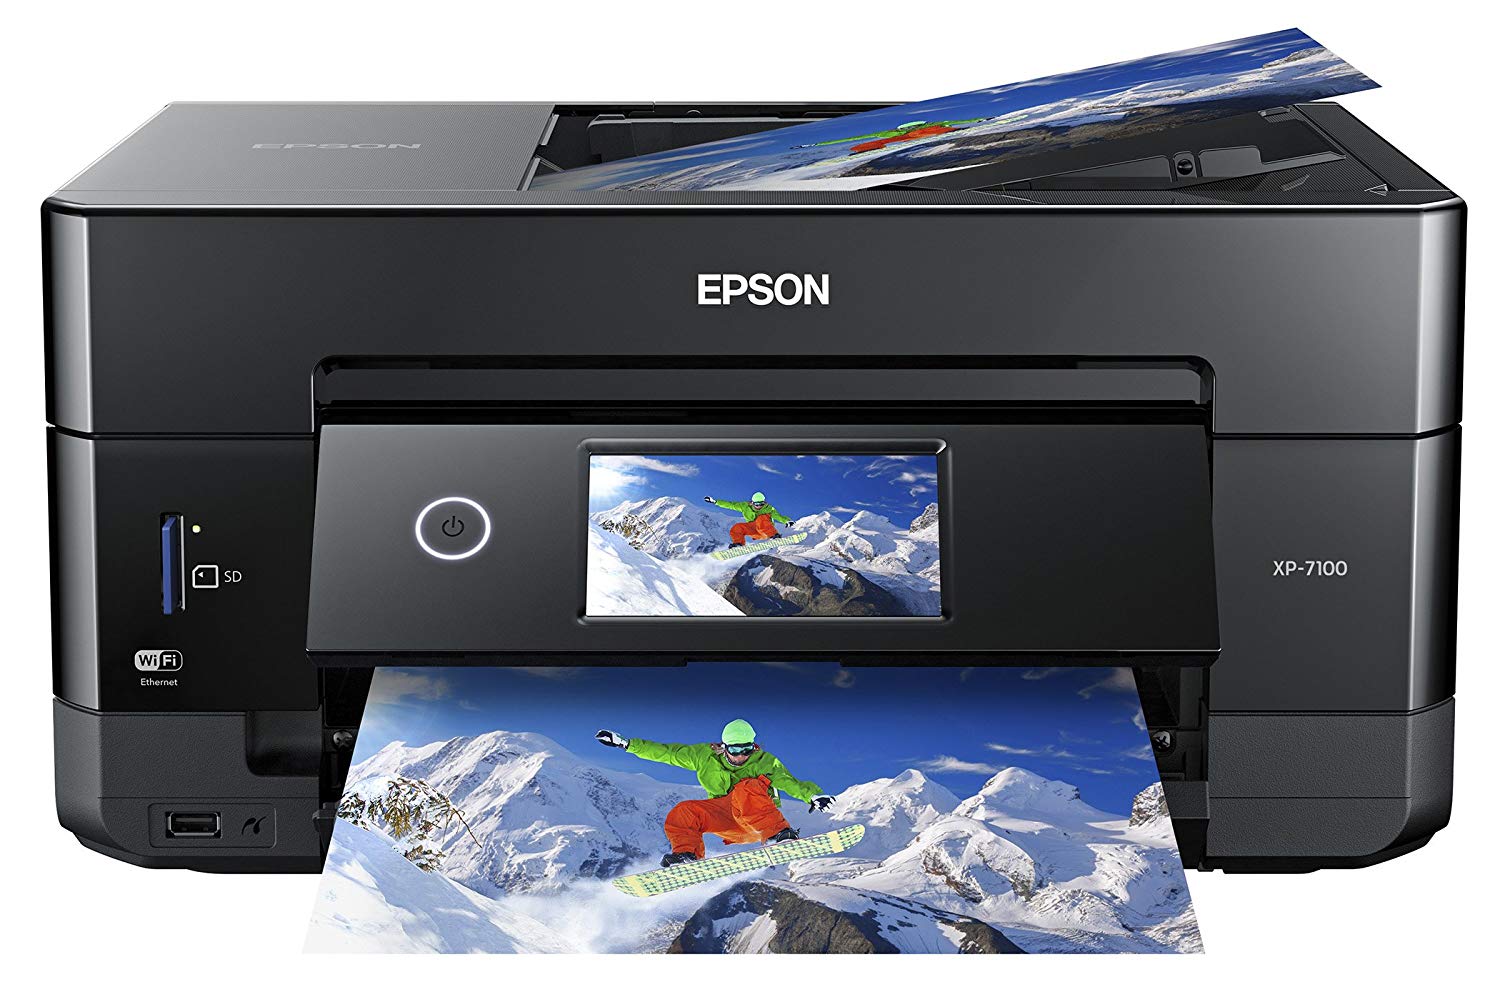 Top 10 Best Wireless Printers for Home Use in 2021 Reviews